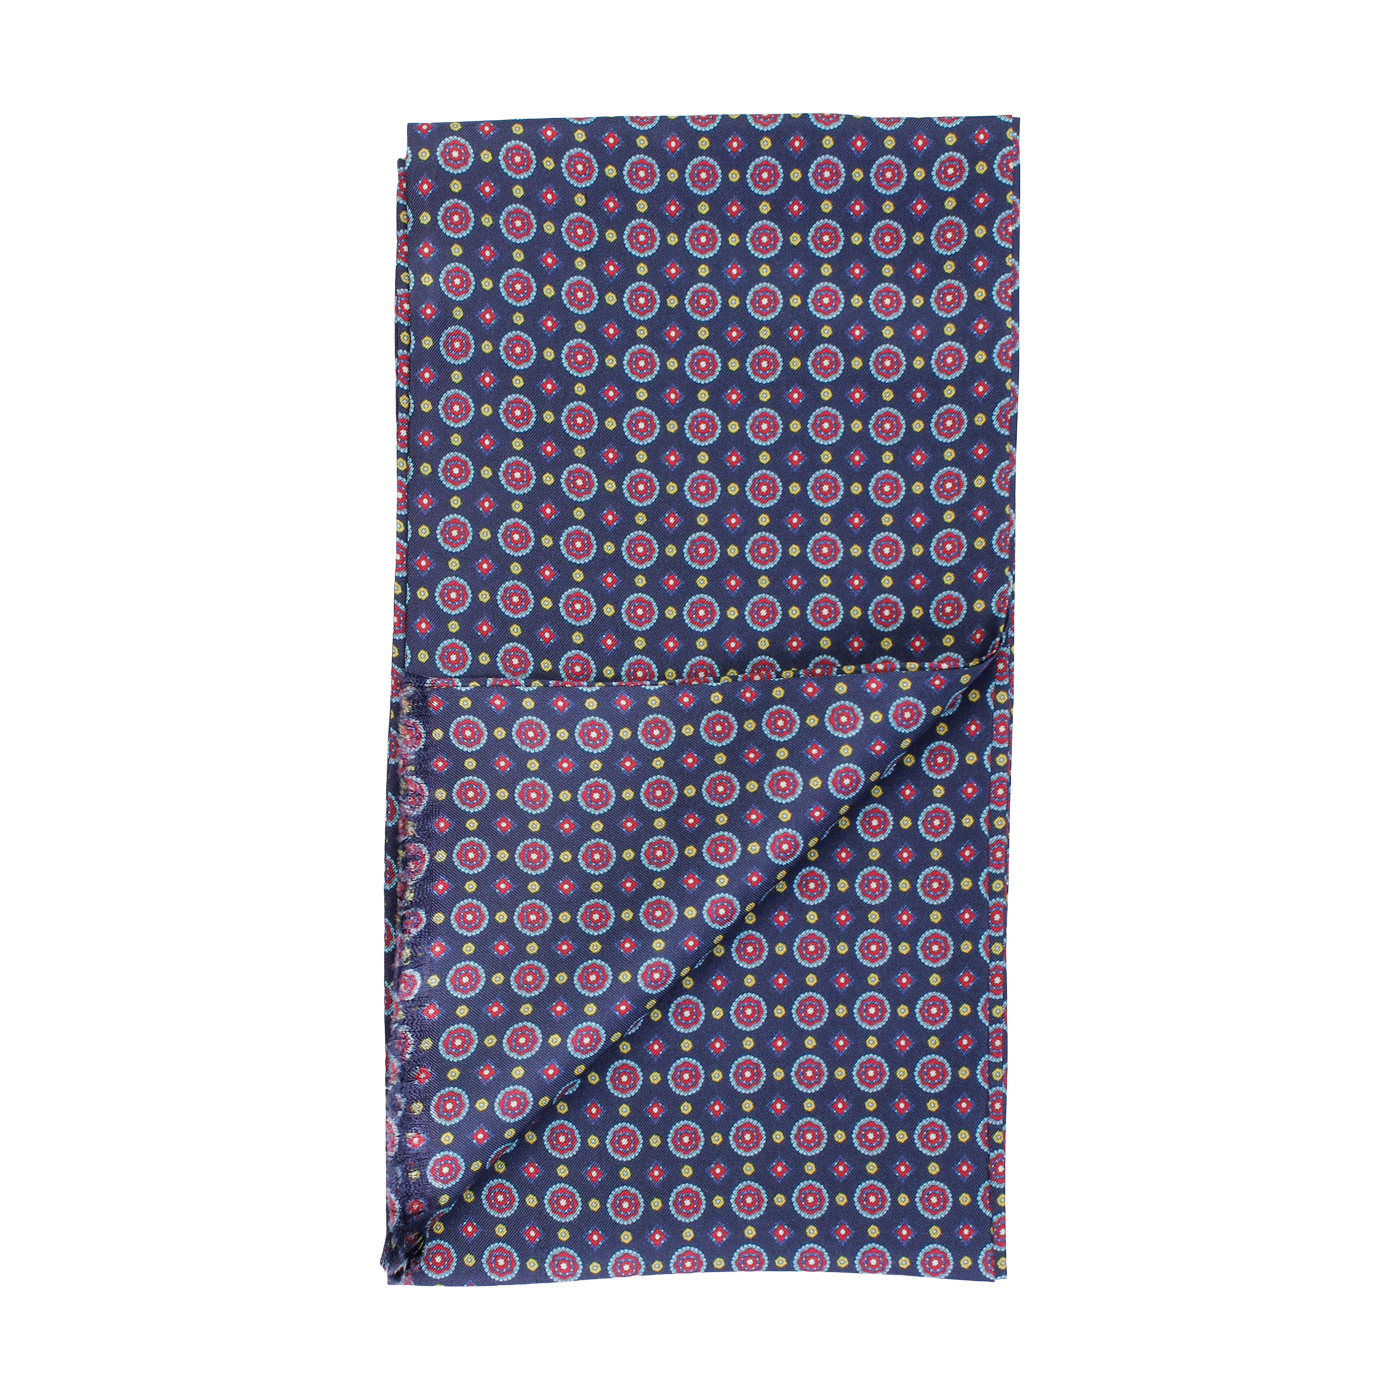 Medallion Printed Silk Twill Long Rectangle Scarf in Choice of Colors by Amanda Christensen